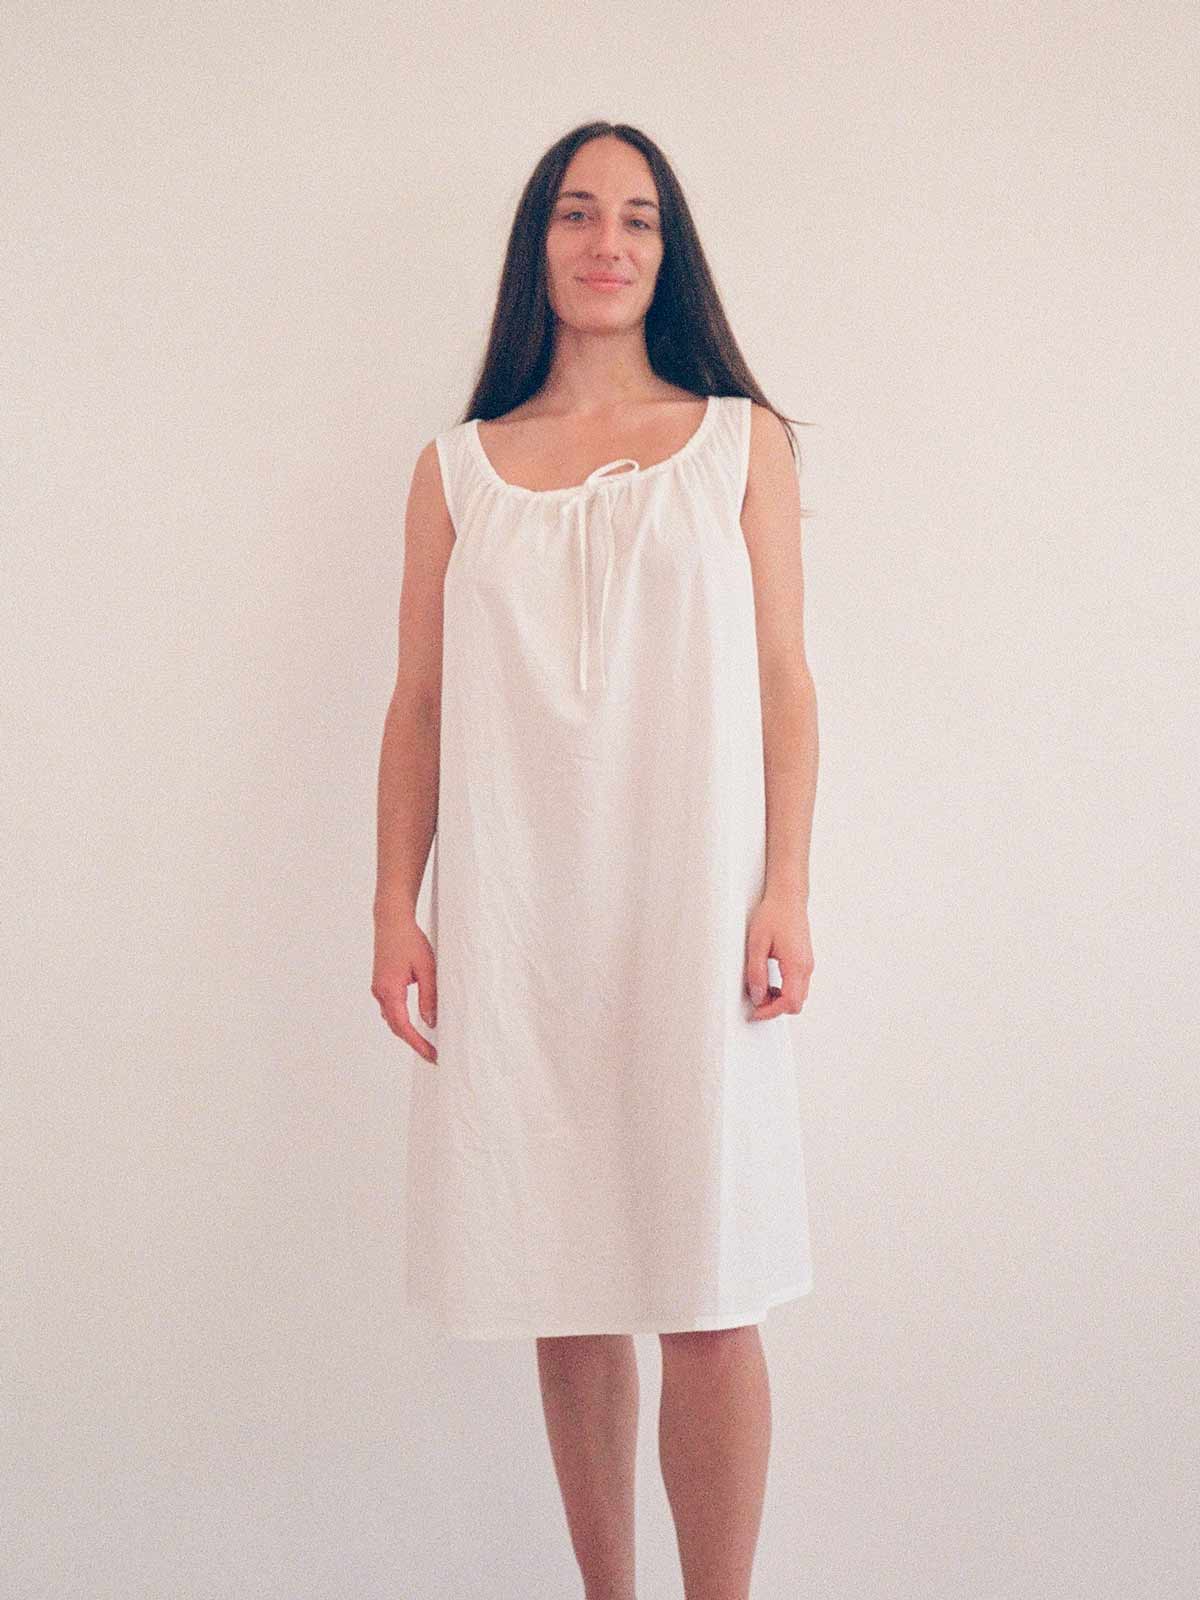 Sleeveless Chemise in White by Domi on woman